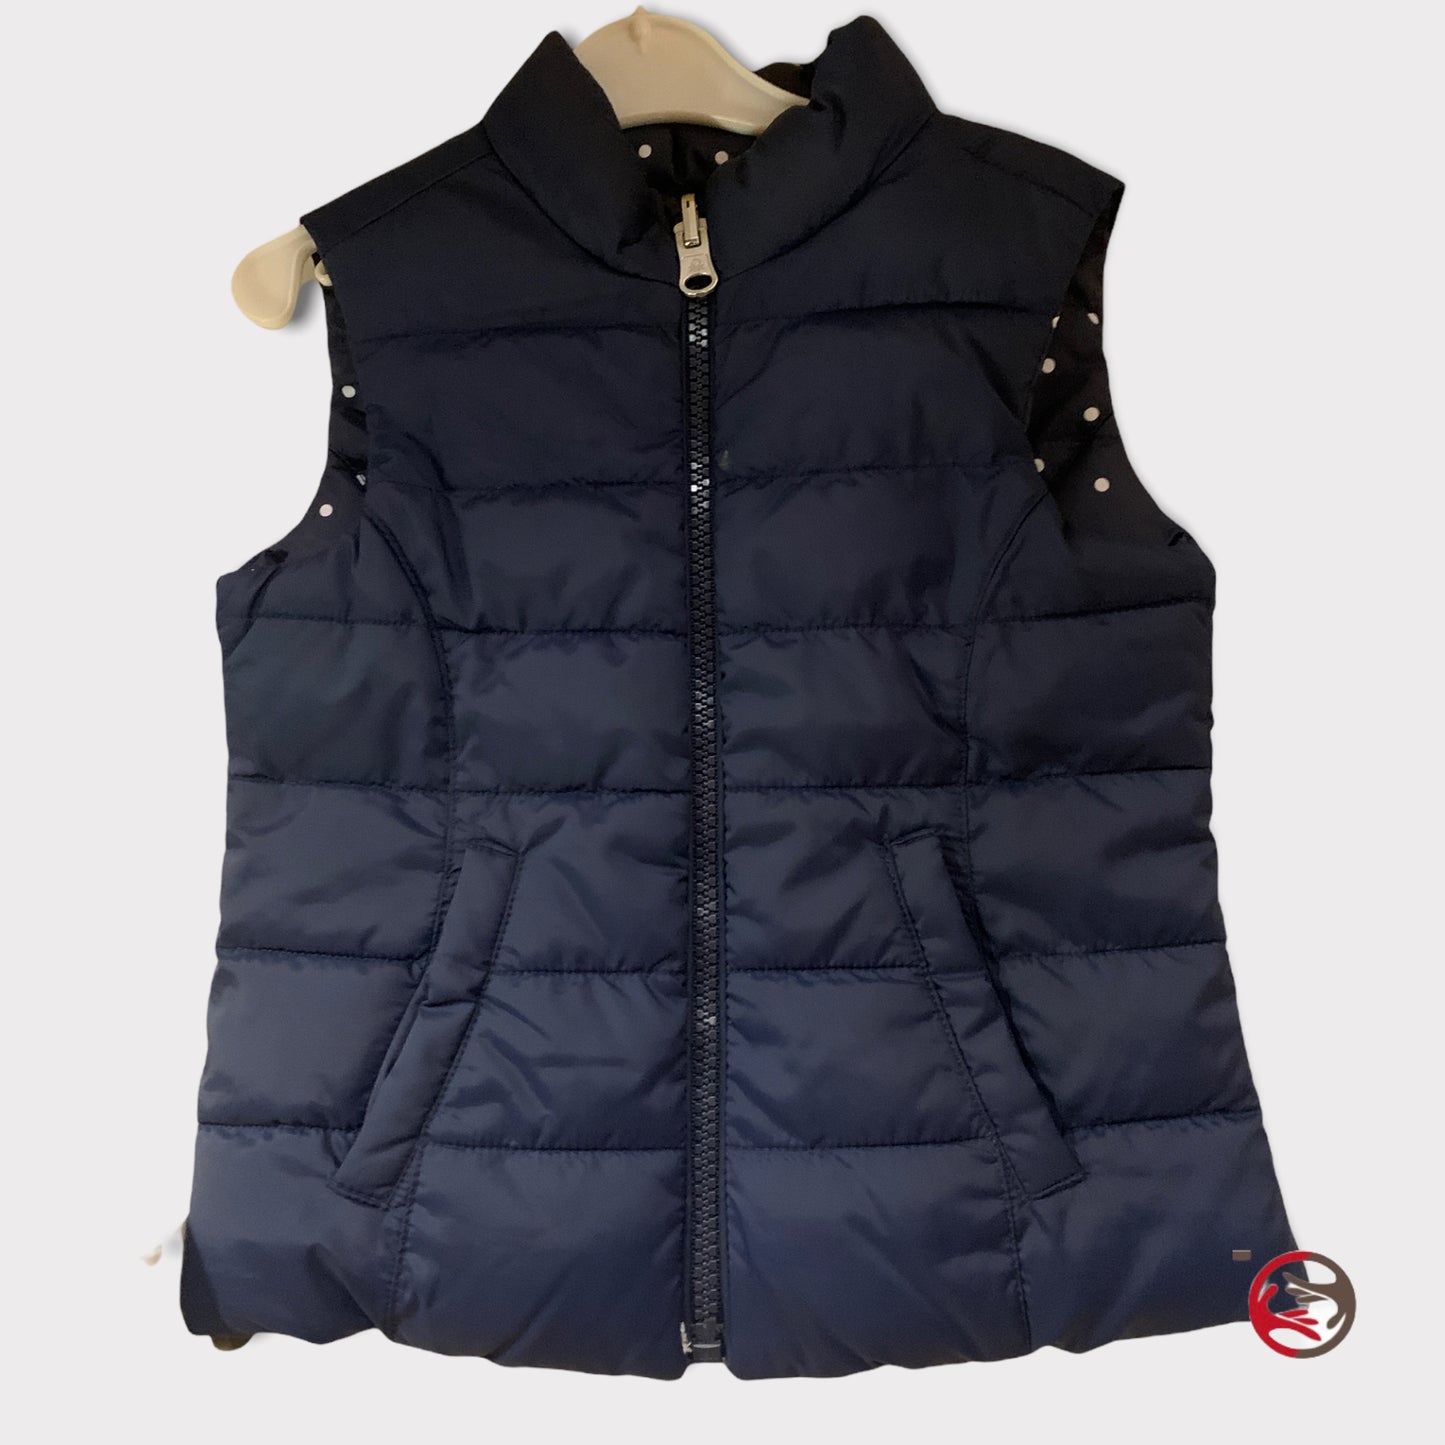 Benetton padded vest for girls 12-24 months 1-2 years double-sided